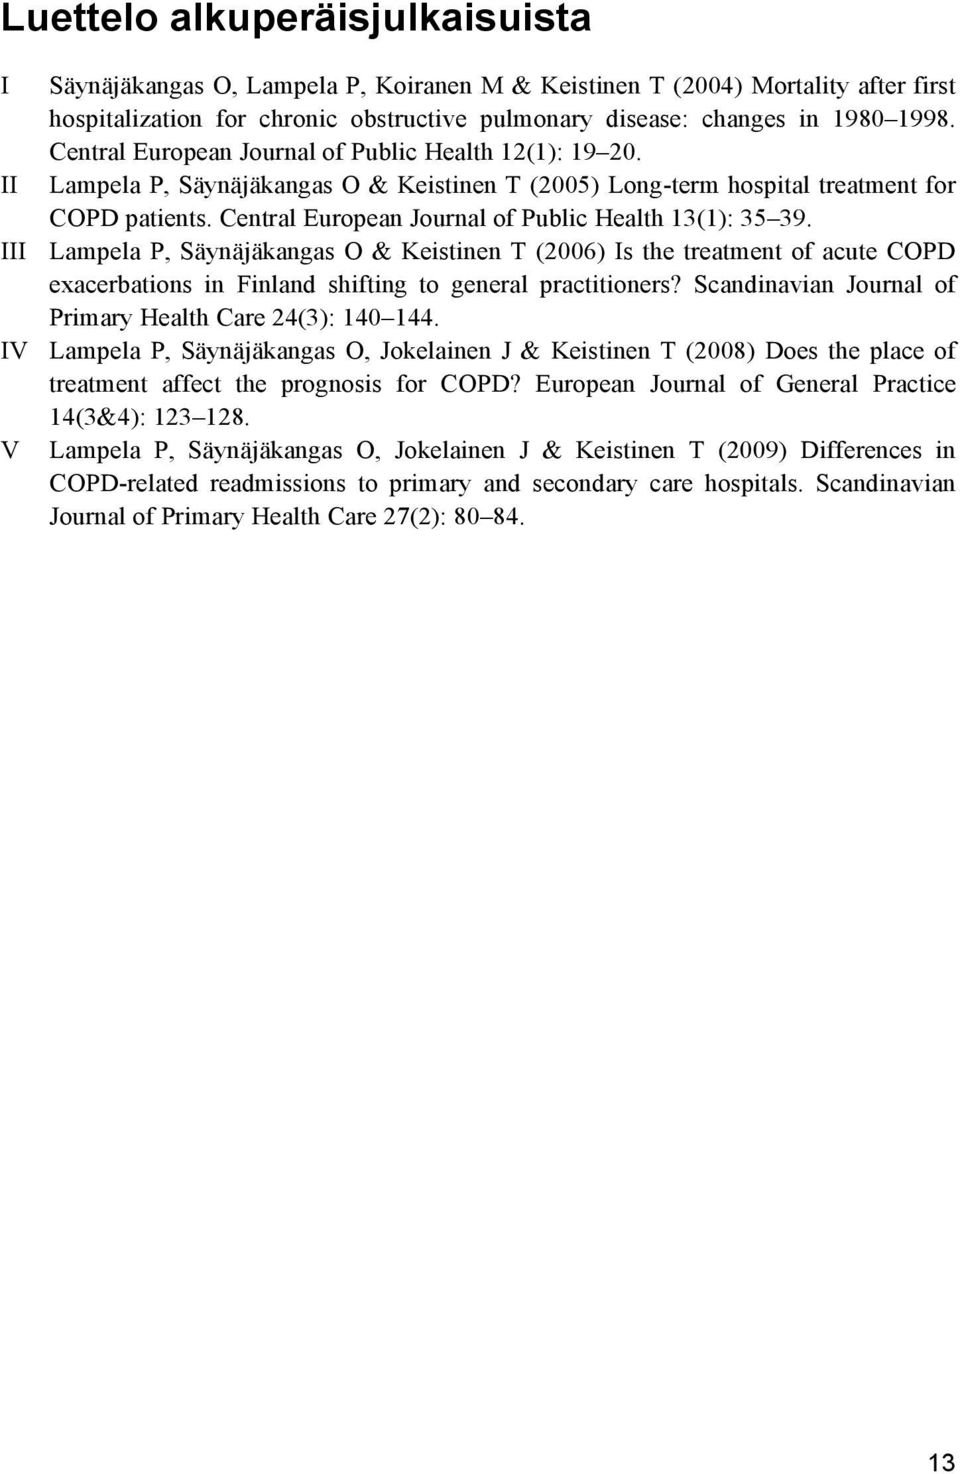 Central European Journal of Public Health 13(1): 35 39. III Lampela P, Säynäjäkangas O & Keistinen T (2006) Is the treatment of acute COPD exacerbations in Finland shifting to general practitioners?